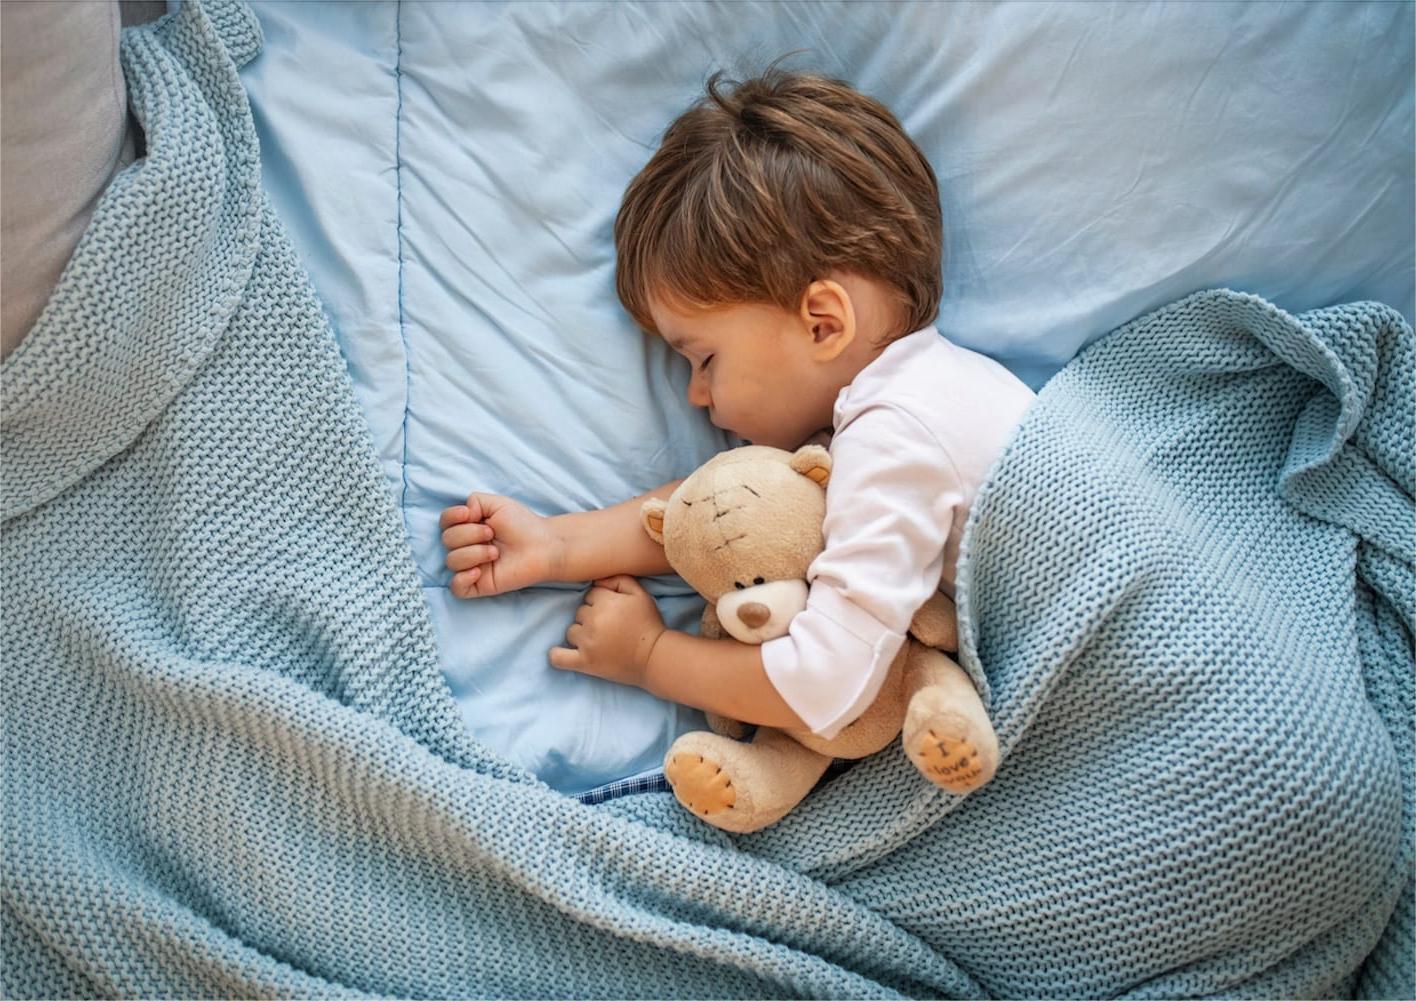 Custom Blankets and Crib Safety: What Parents Need to Know